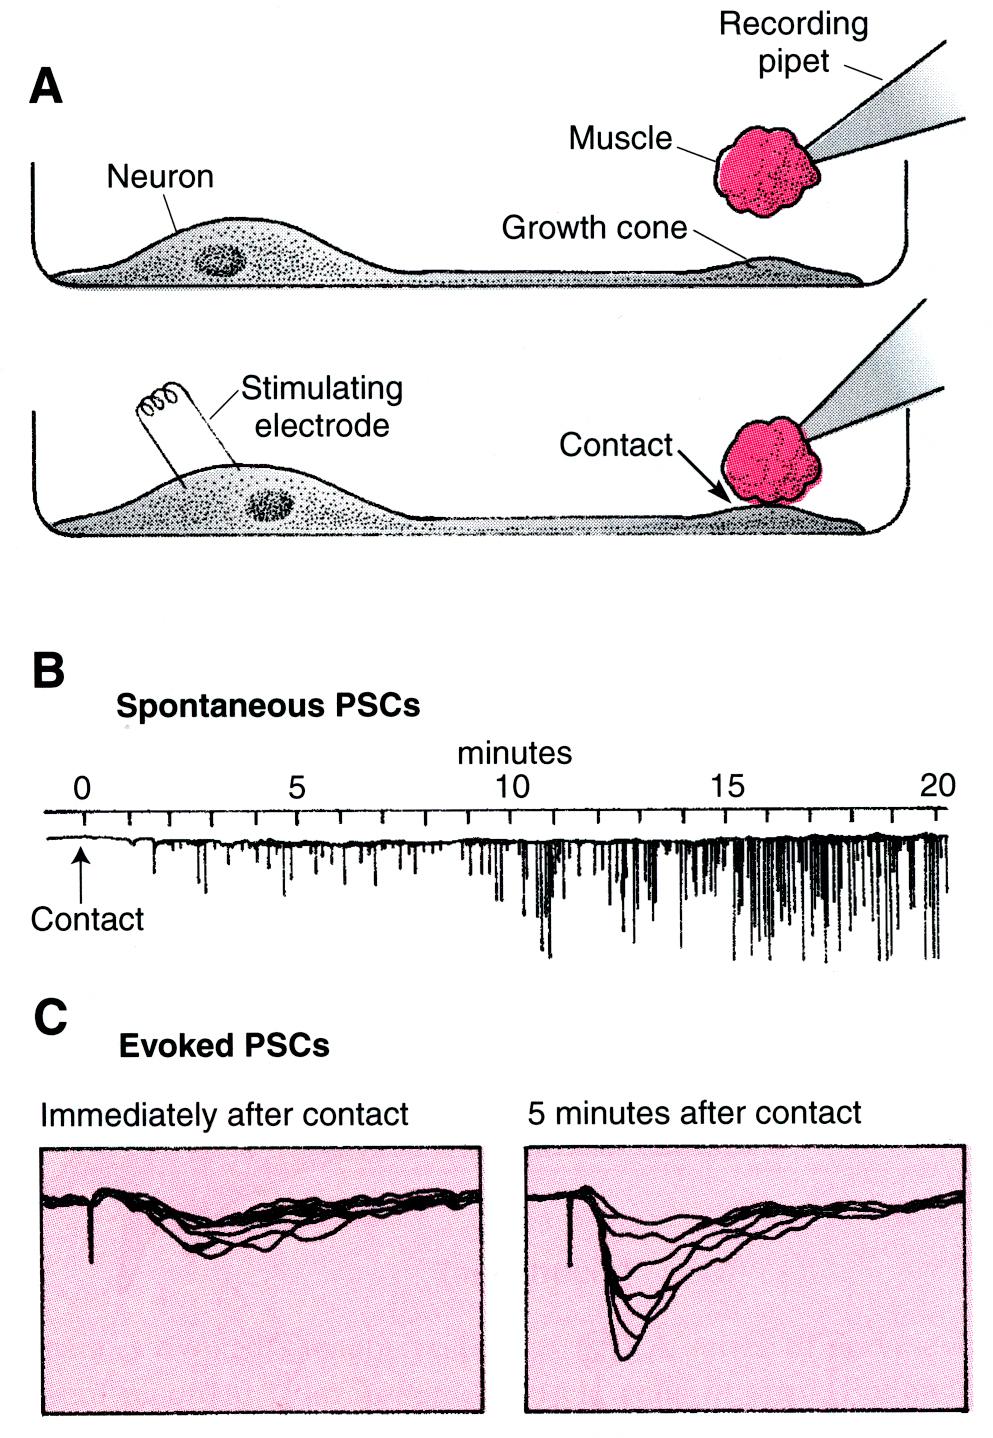 Presynaptic Differentiation: Contact with a Muscle Cell RAPIDLY Stimulates ACh Release Cultures of Xenopus spinal neurons were grown and pipets were used to record from round muscle cells and to